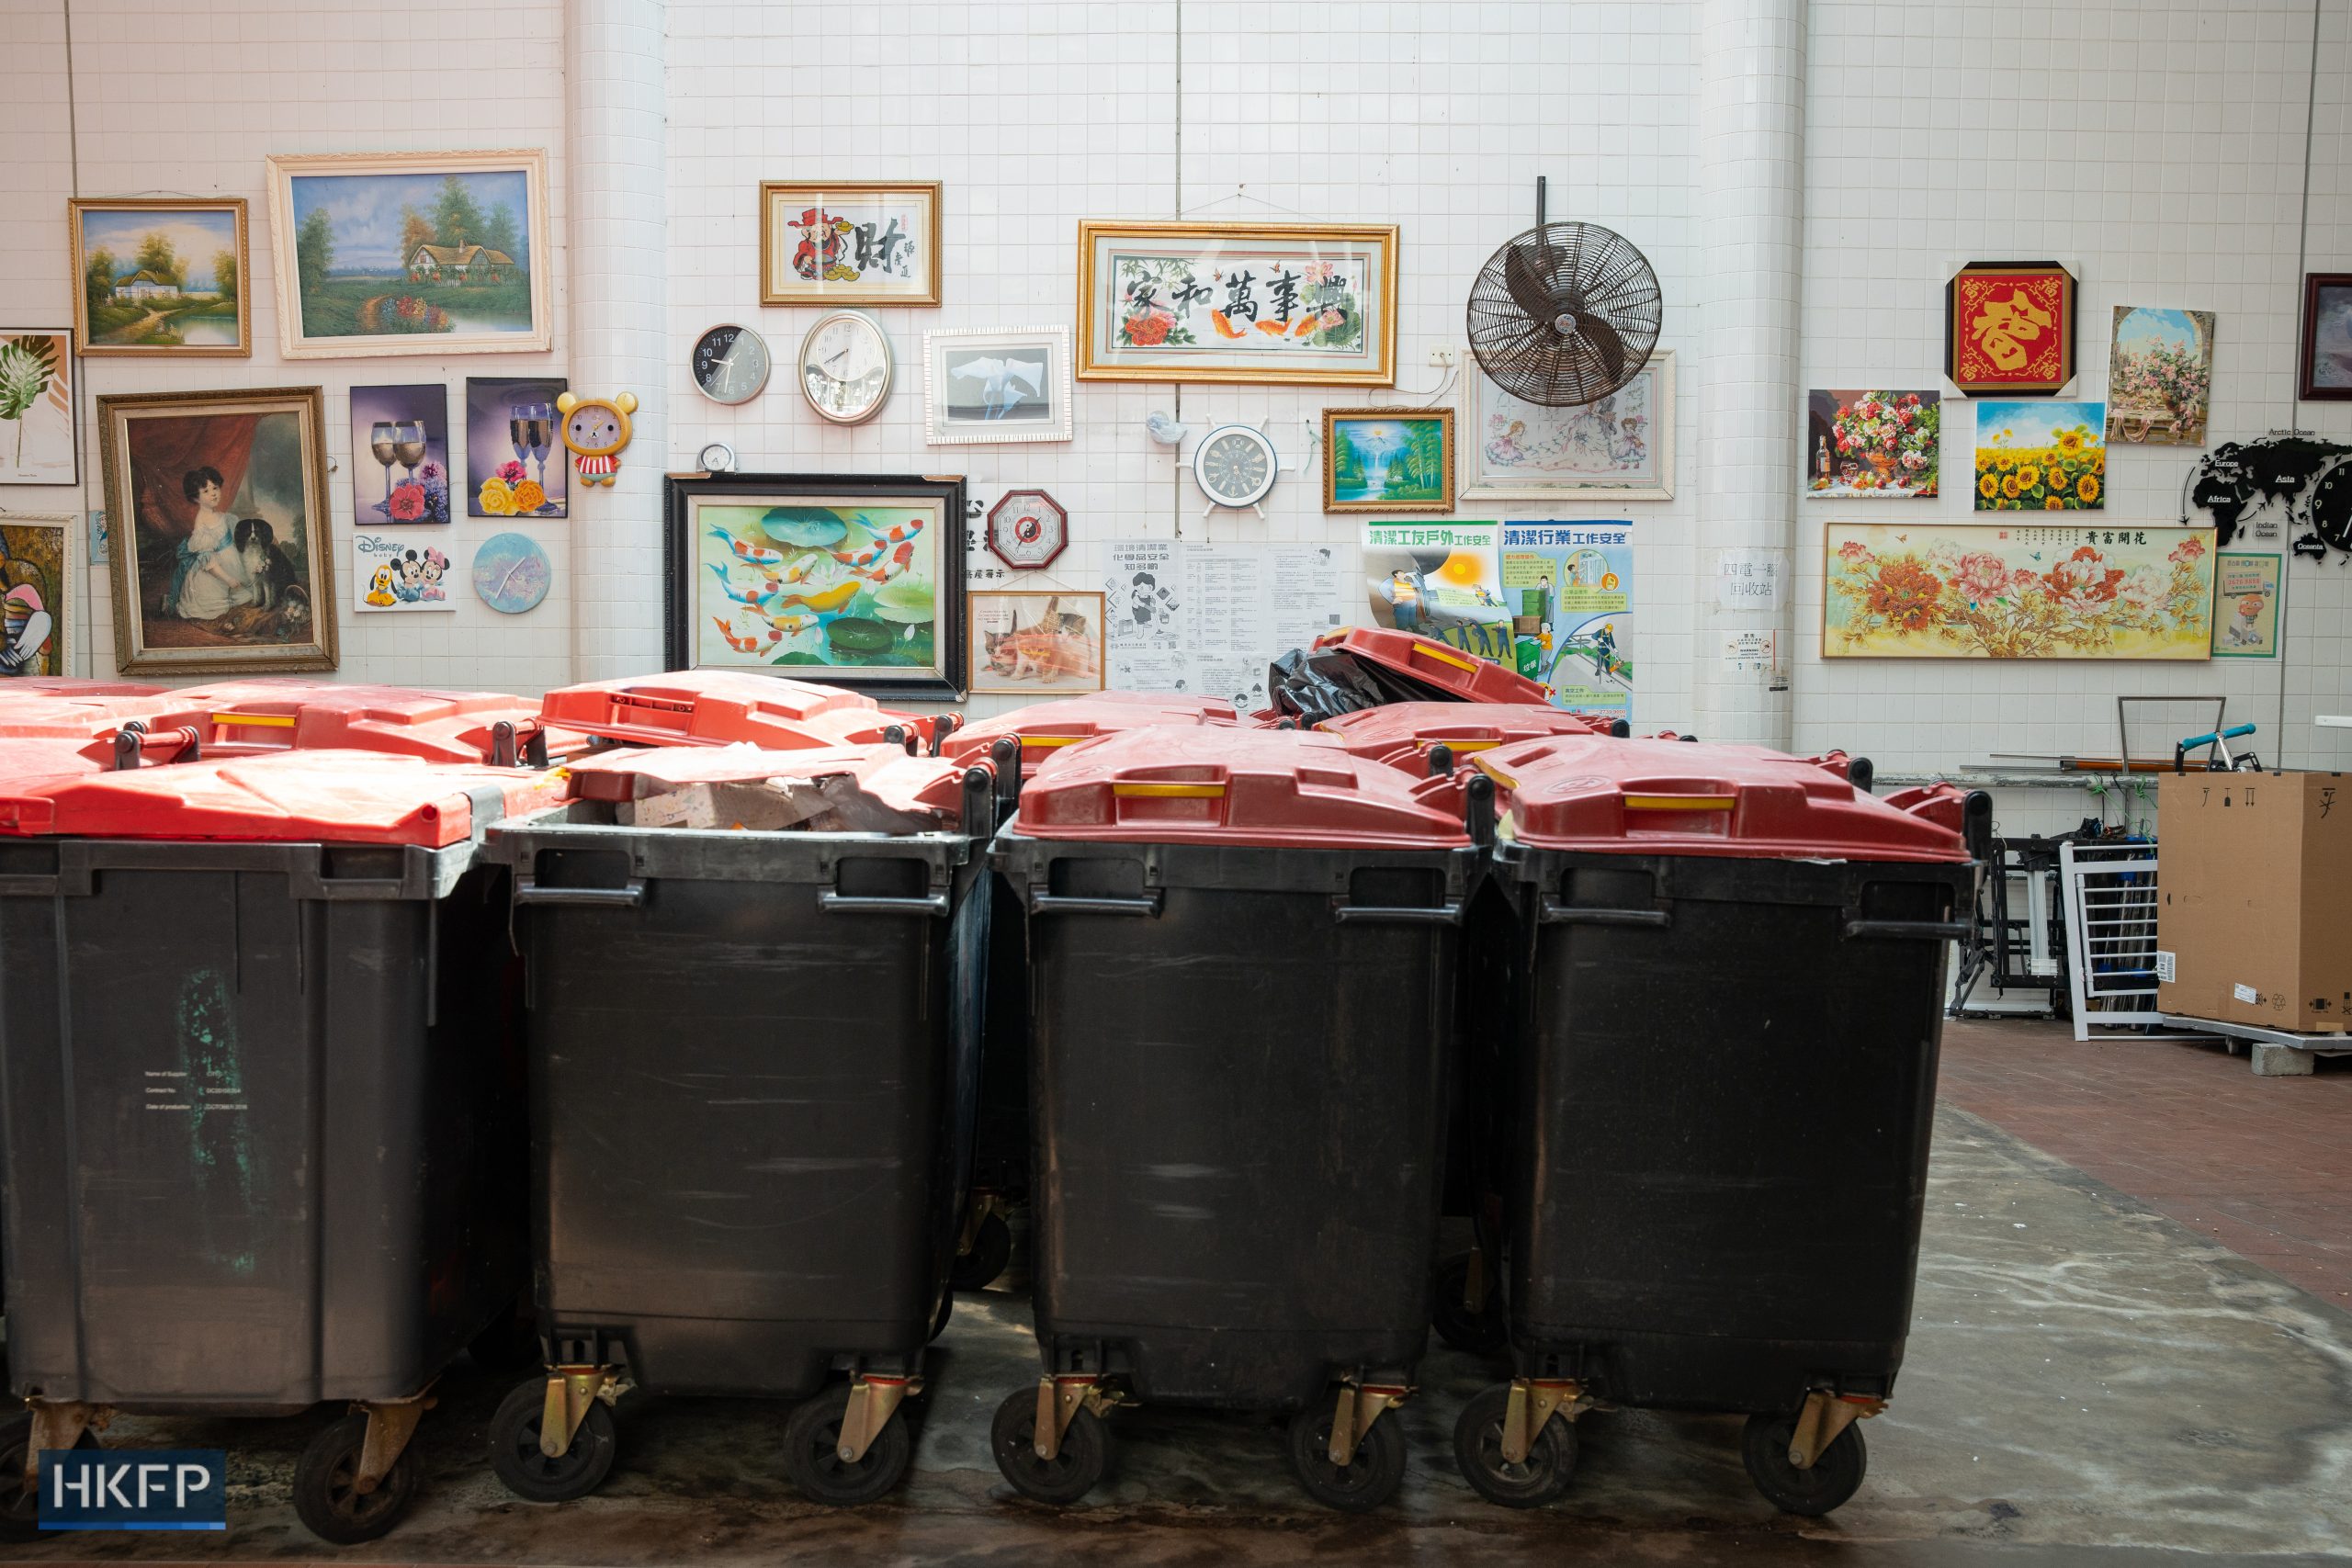 A refuse collection point in Kwai Chung Estate displayed recycled painting and decoration on the wall on March 6, 2023. Cleaners were banned from hanging decorations on the wall after the refuse collection point was reported and became famous. Photo: Kyle Lam/HKFP.